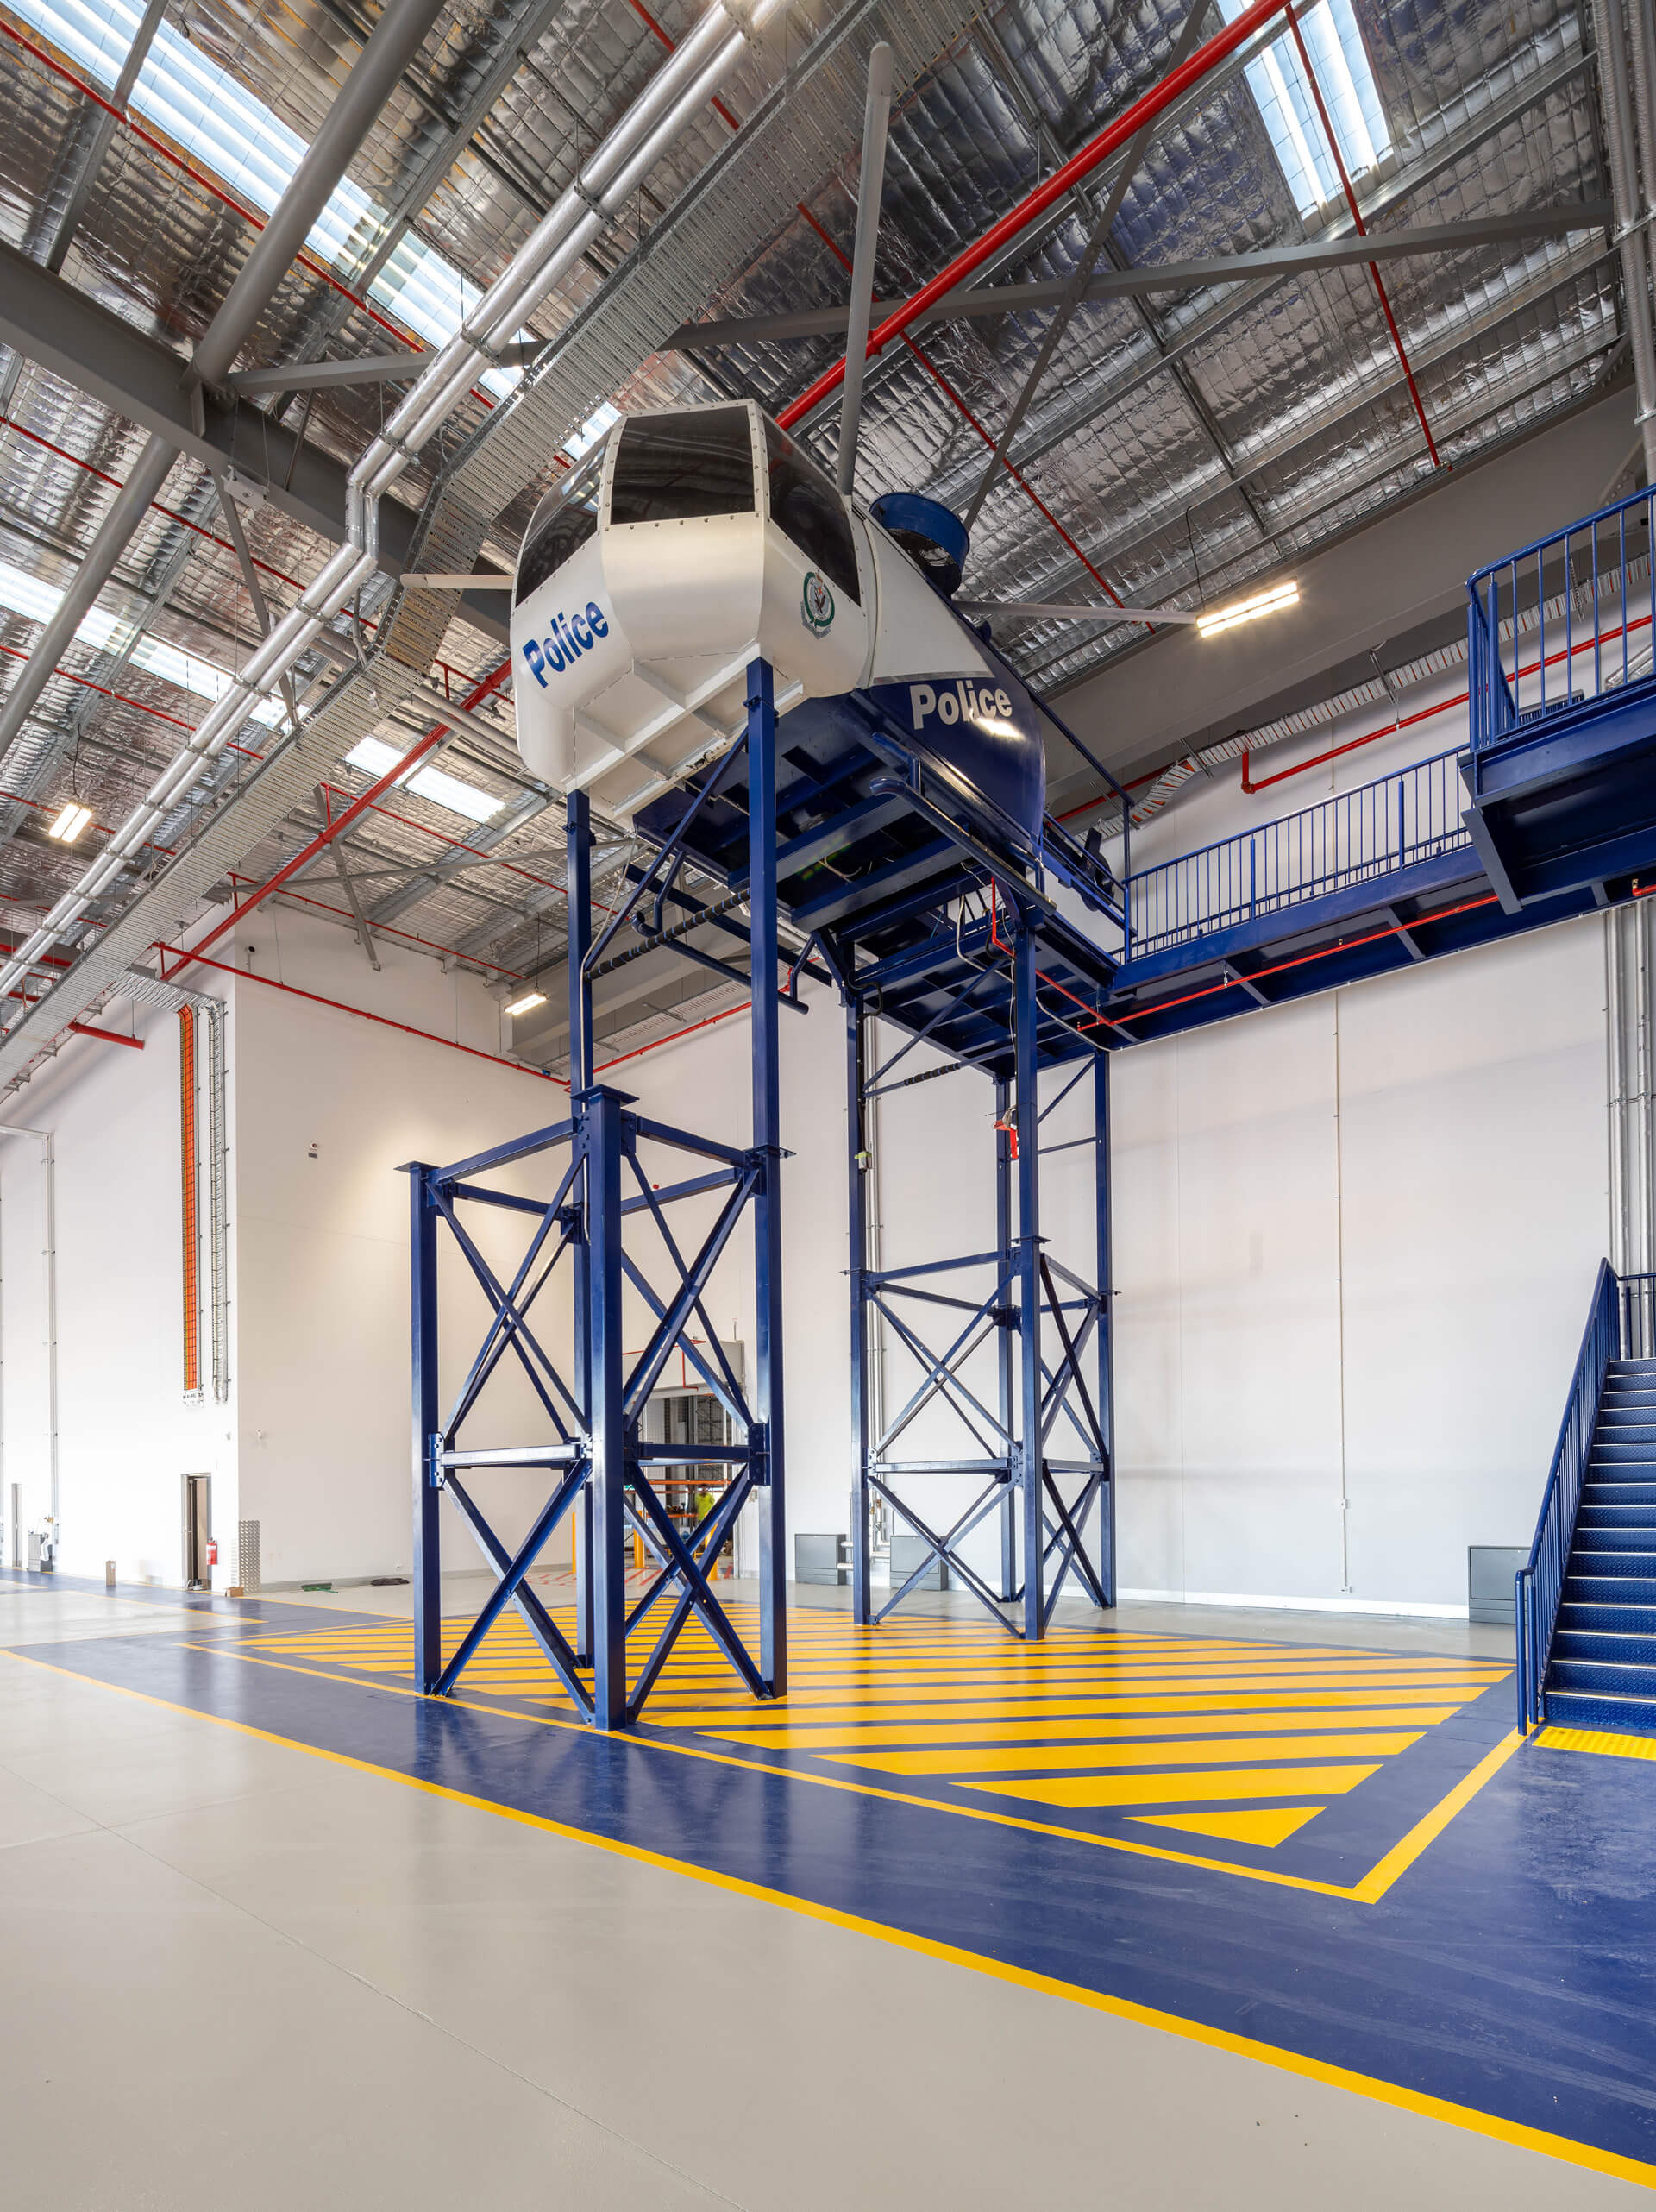 8 helicopter hangar bay fixed helicoptor structure for training at polair facility bankstown taylor construction refurbishment and live environments